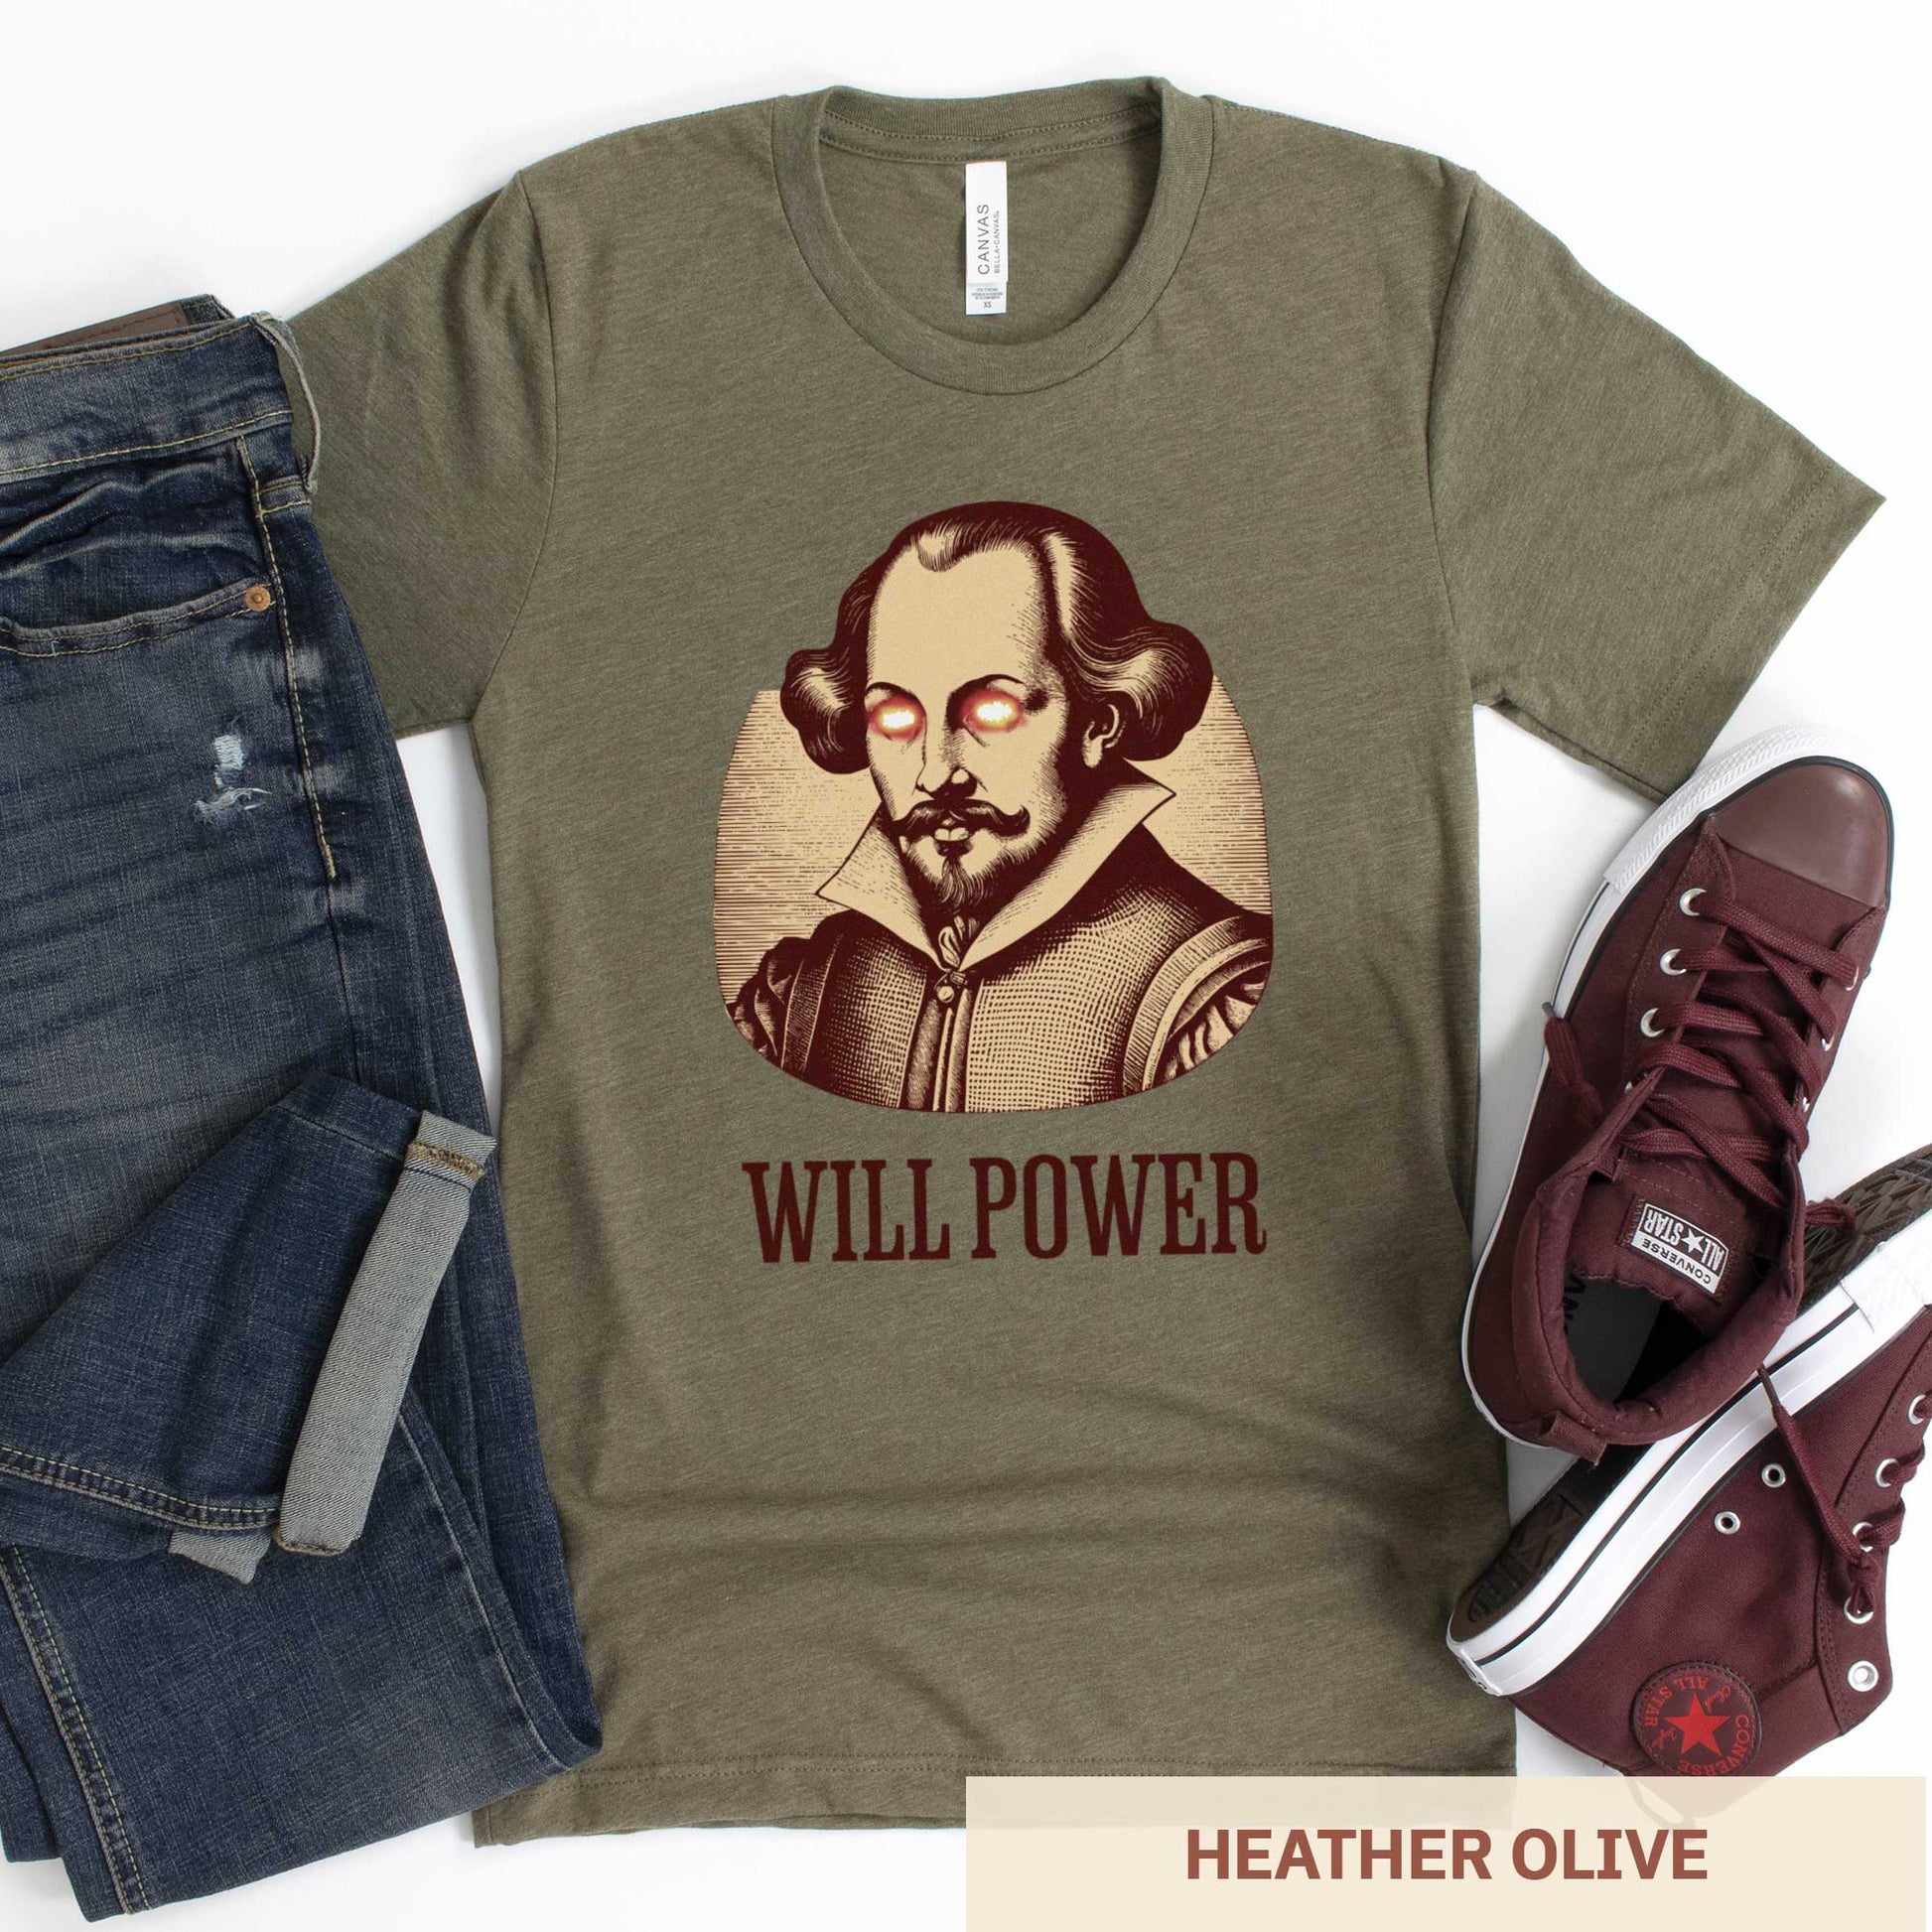 A heather olive Bella Canvas t-shirt featuring a woodcut of William Shakespeare with glowing superhero eyes and the words Will Power.